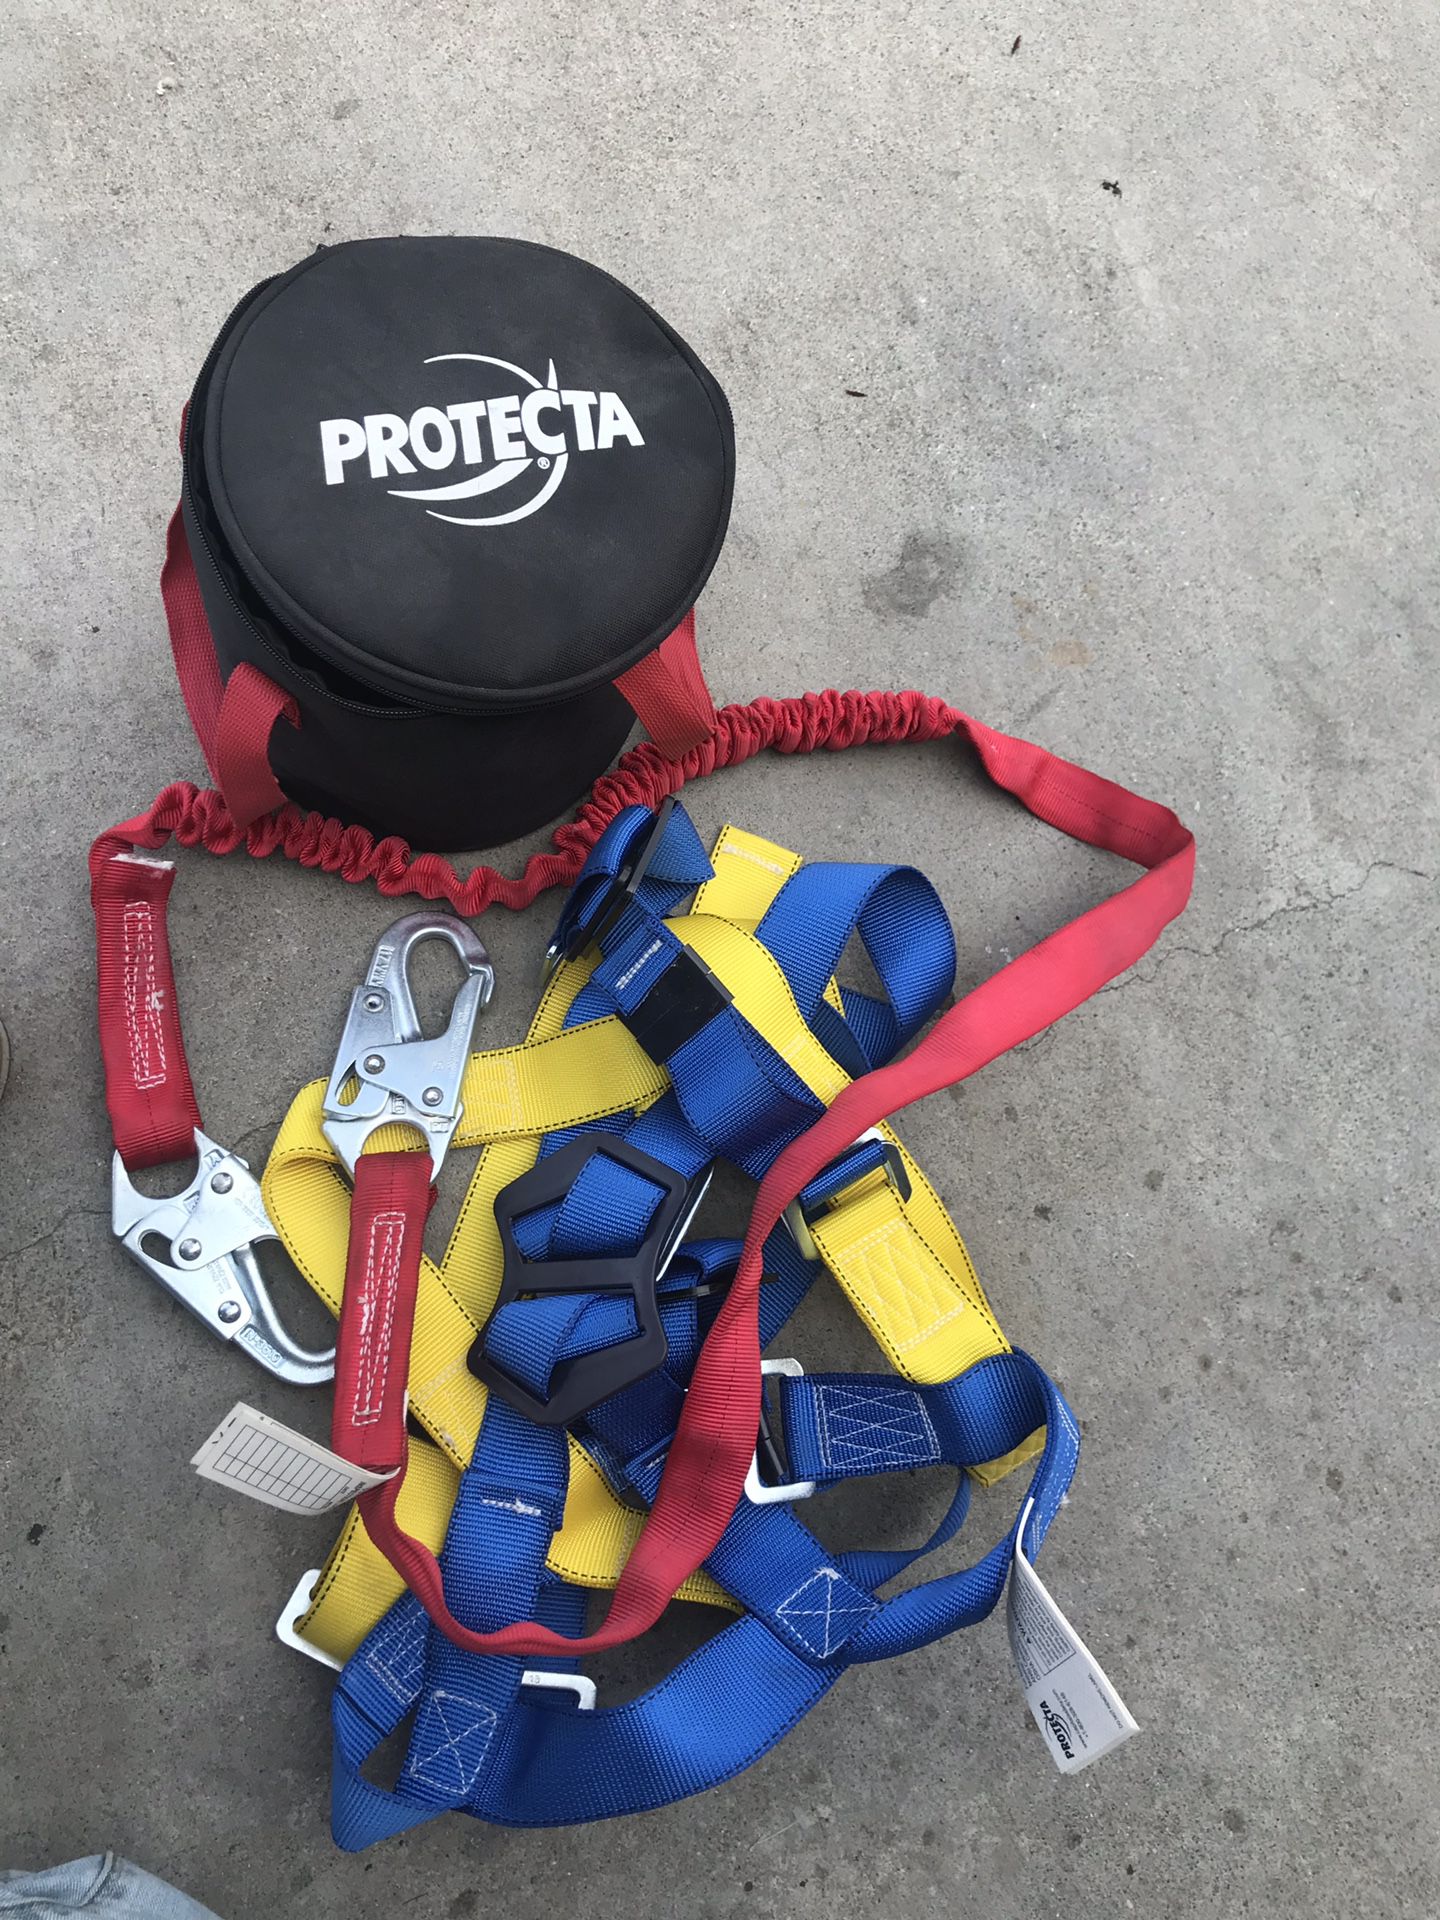 New PROTECTA Fall Protection Harness